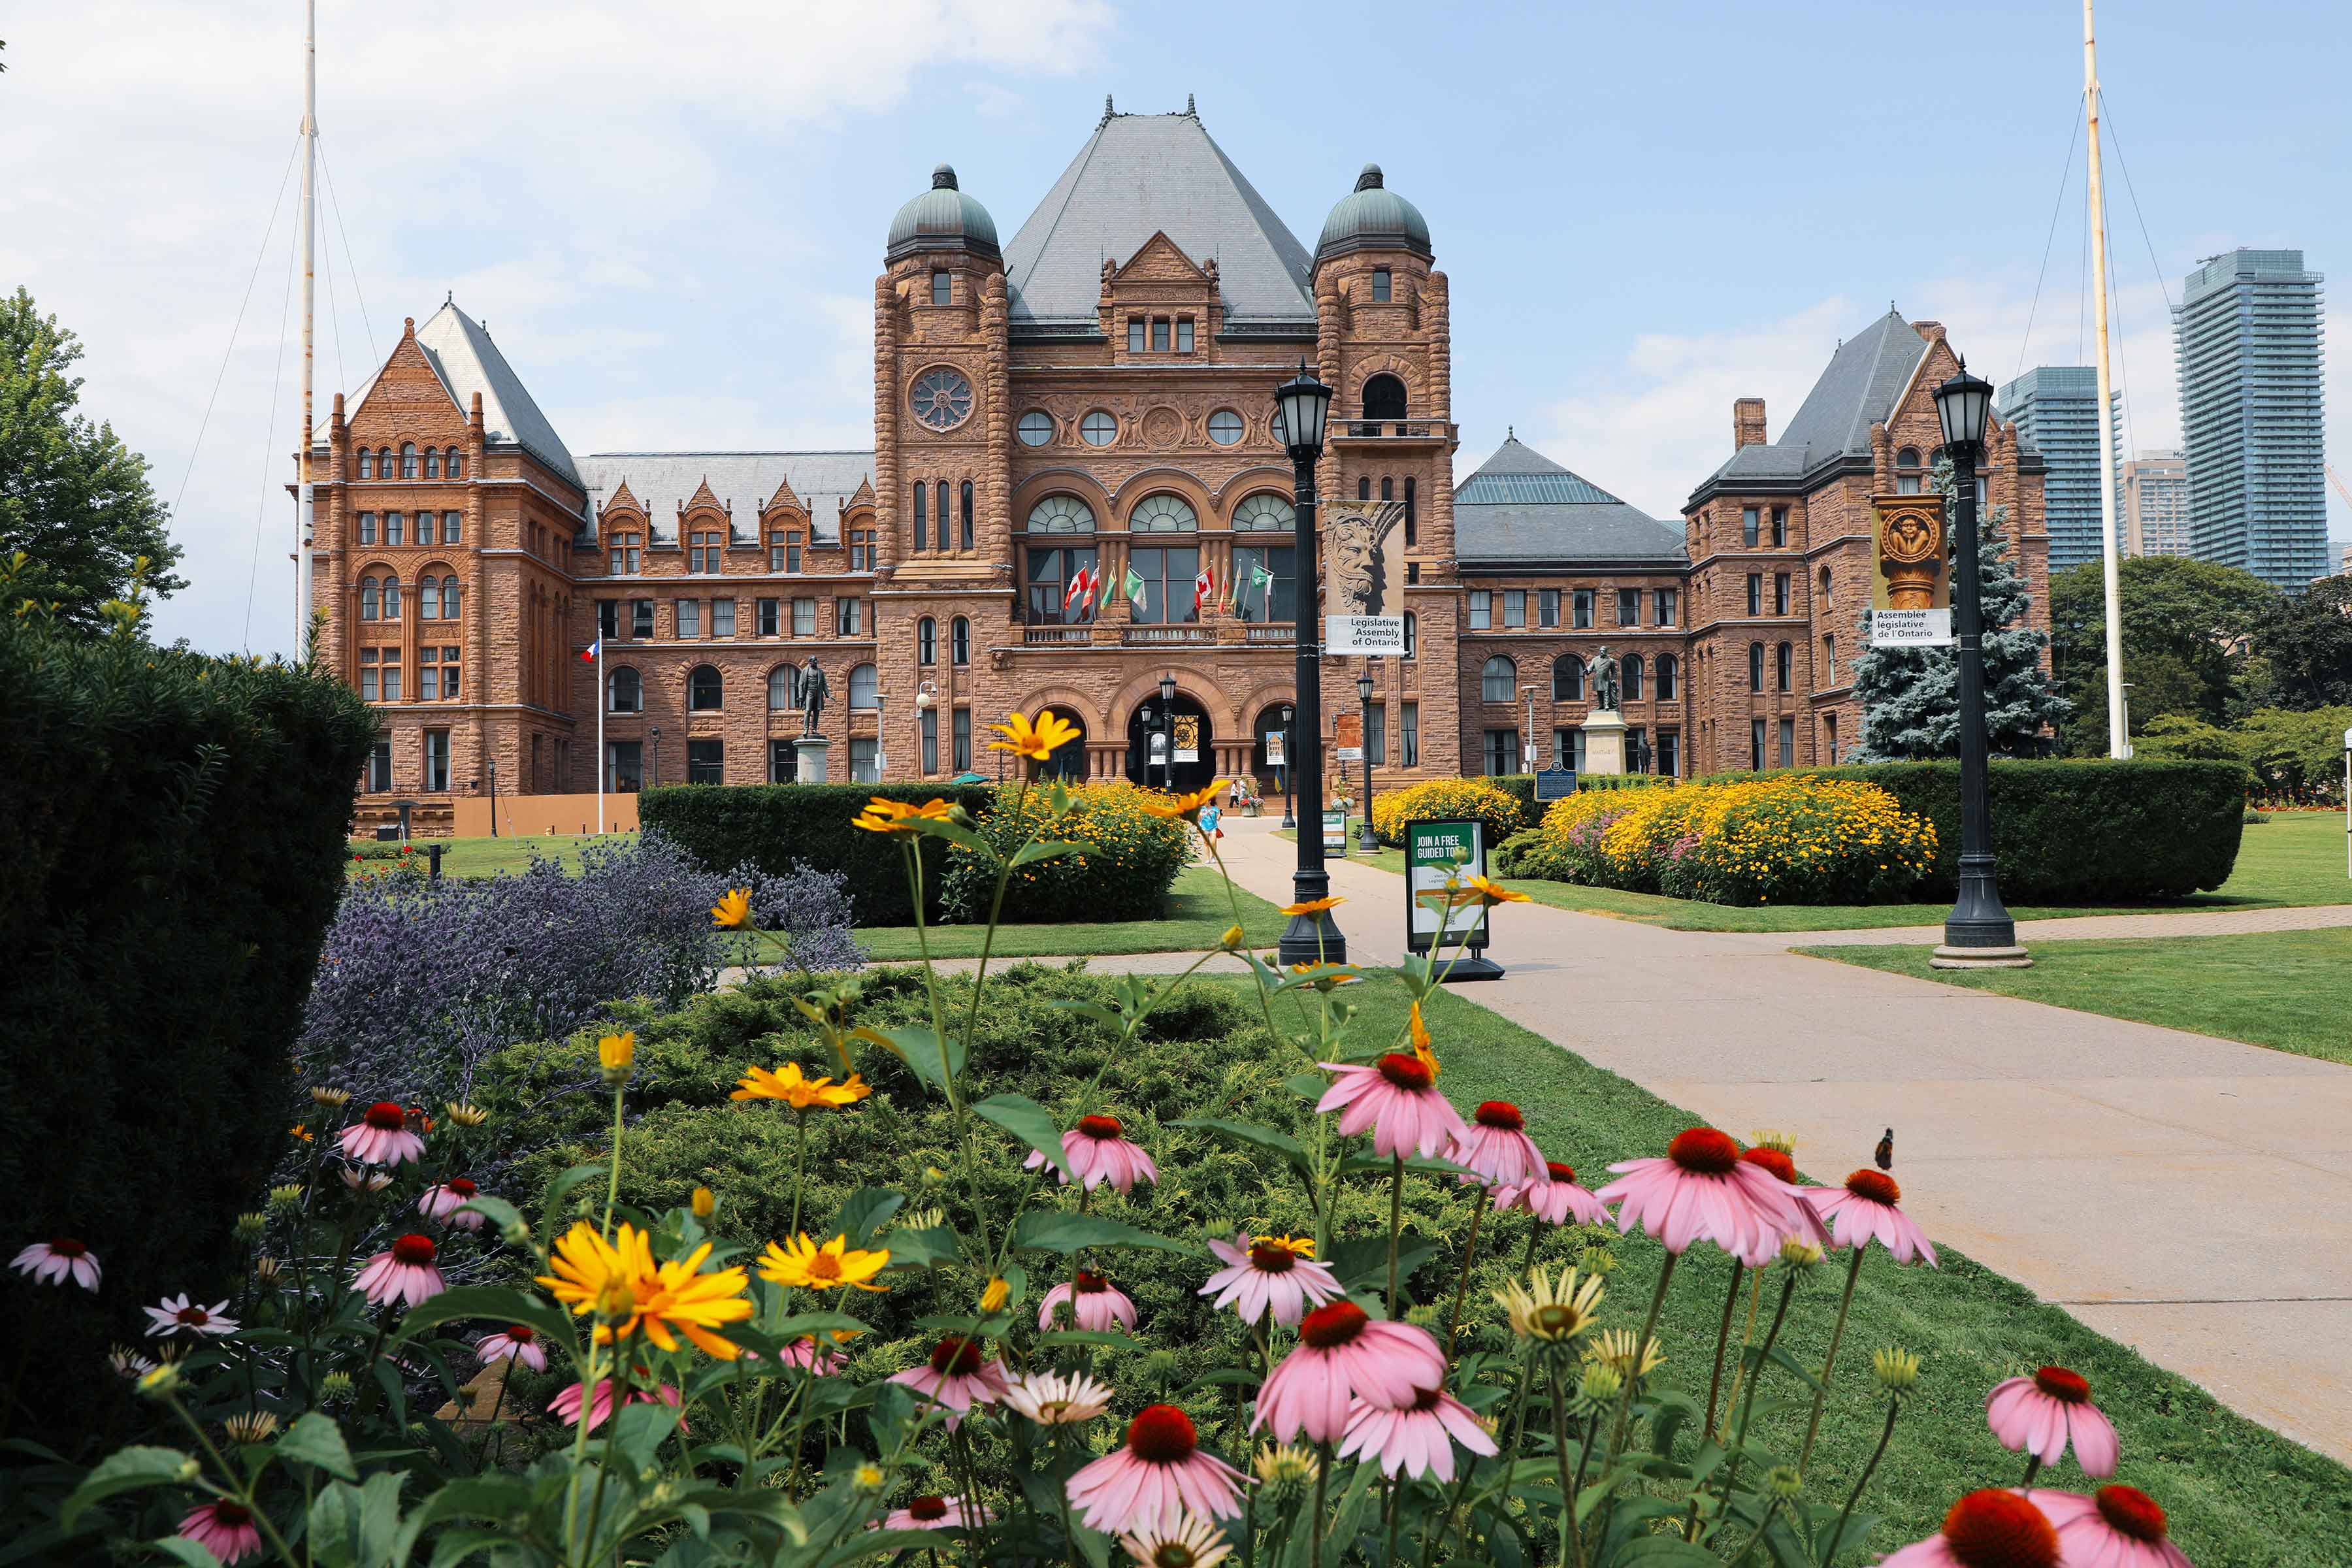 The front of the Legislative building in the summer with multicoloured flowers in the foreground